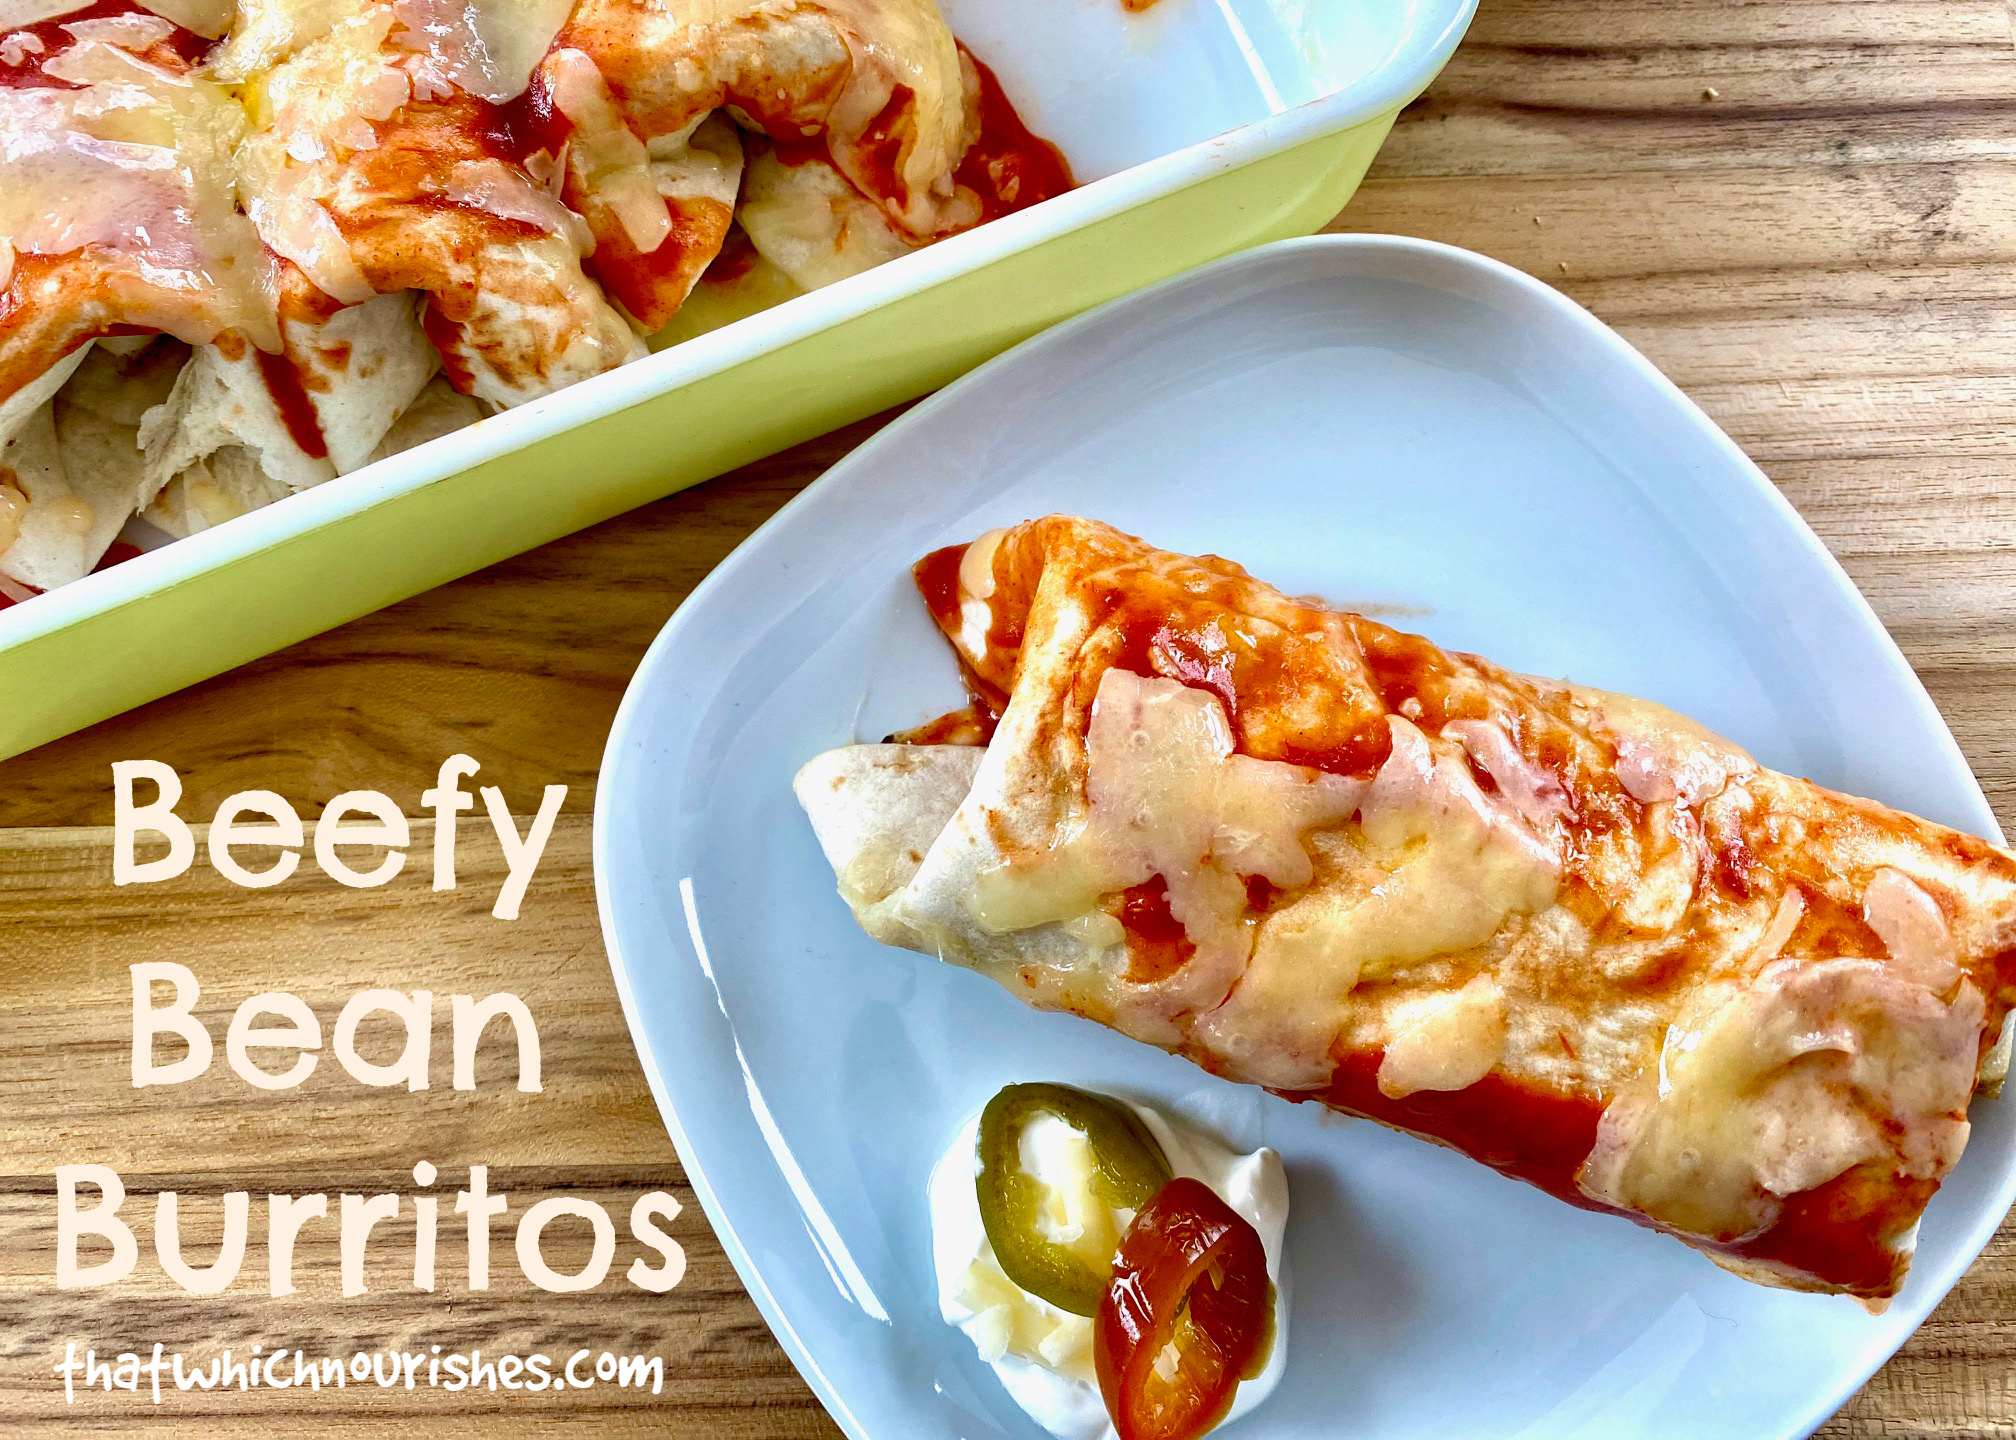 Beefy Bean Burritos -- Beef and bean burritos made with a few simple ingredients that turn into a magical, gooey, delicious meal you'll crave again and again. | thatwhichnourishes.com